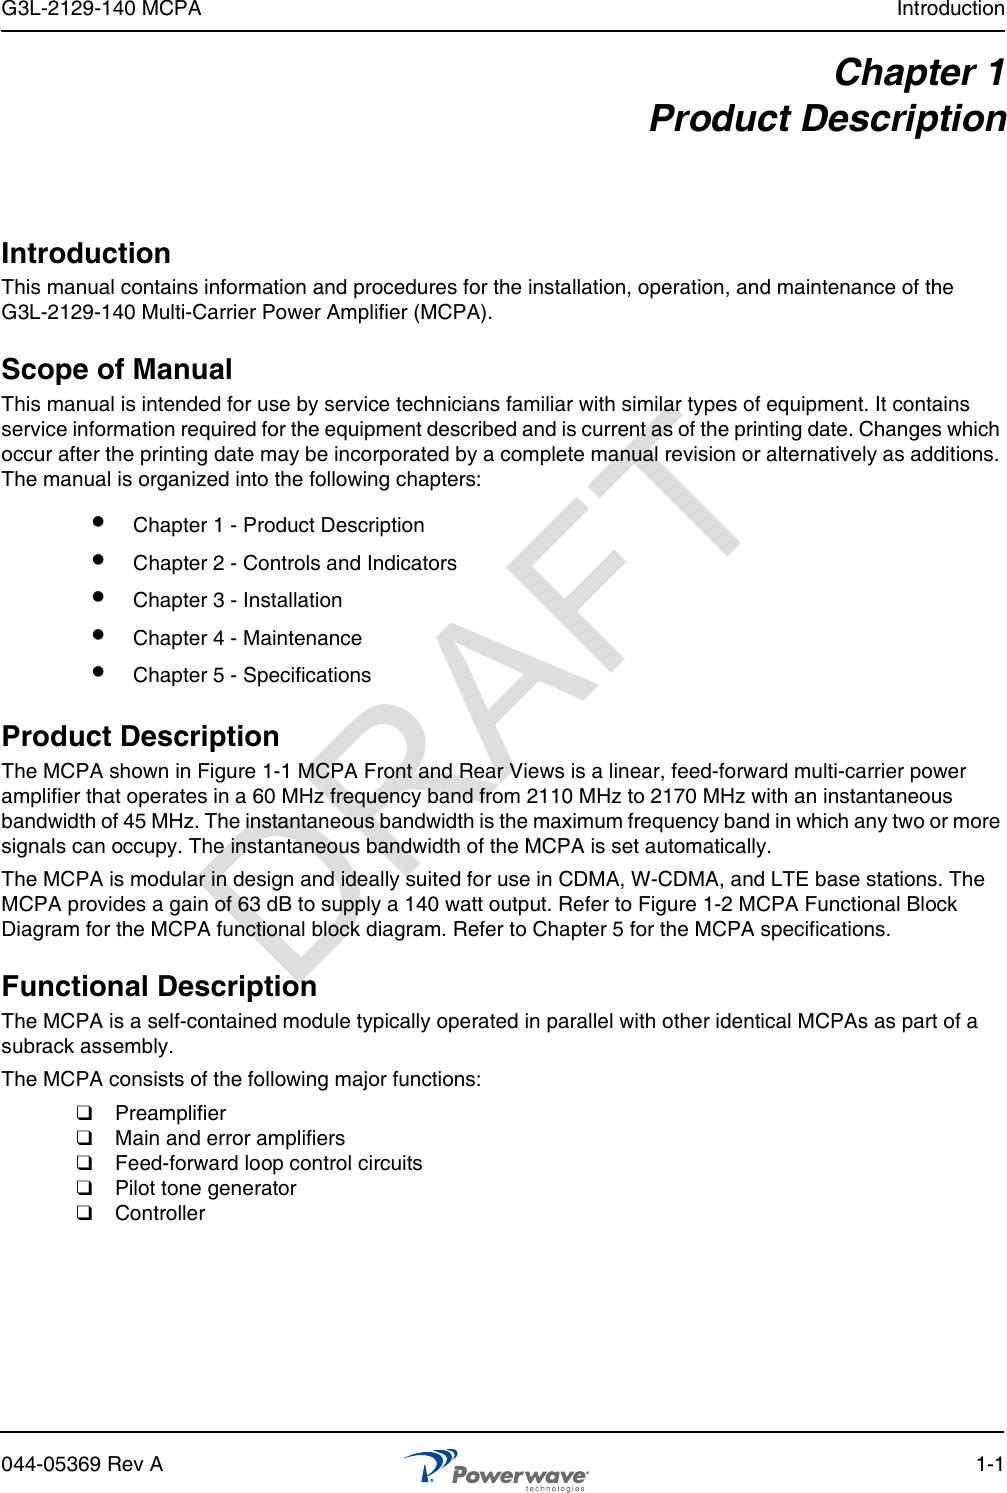 G3L-2129-140 MCPA Introduction044-05369 Rev A 1-1Chapter 1Product DescriptionIntroductionThis manual contains information and procedures for the installation, operation, and maintenance of the G3L-2129-140 Multi-Carrier Power Amplifier (MCPA).Scope of ManualThis manual is intended for use by service technicians familiar with similar types of equipment. It contains service information required for the equipment described and is current as of the printing date. Changes which occur after the printing date may be incorporated by a complete manual revision or alternatively as additions. The manual is organized into the following chapters:Product DescriptionThe MCPA shown in Figure 1-1 MCPA Front and Rear Views is a linear, feed-forward multi-carrier power amplifier that operates in a 60 MHz frequency band from 2110 MHz to 2170 MHz with an instantaneous bandwidth of 45 MHz. The instantaneous bandwidth is the maximum frequency band in which any two or more signals can occupy. The instantaneous bandwidth of the MCPA is set automatically.The MCPA is modular in design and ideally suited for use in CDMA, W-CDMA, and LTE base stations. The MCPA provides a gain of 63 dB to supply a 140 watt output. Refer to Figure 1-2 MCPA Functional Block Diagram for the MCPA functional block diagram. Refer to Chapter 5 for the MCPA specifications.Functional DescriptionThe MCPA is a self-contained module typically operated in parallel with other identical MCPAs as part of a subrack assembly. The MCPA consists of the following major functions:❑  Preamplifier ❑  Main and error amplifiers❑  Feed-forward loop control circuits❑  Pilot tone generator❑  Controller Chapter 1 - Product Description Chapter 2 - Controls and Indicators Chapter 3 - Installation Chapter 4 - Maintenance Chapter 5 - SpecificationsDRAFT